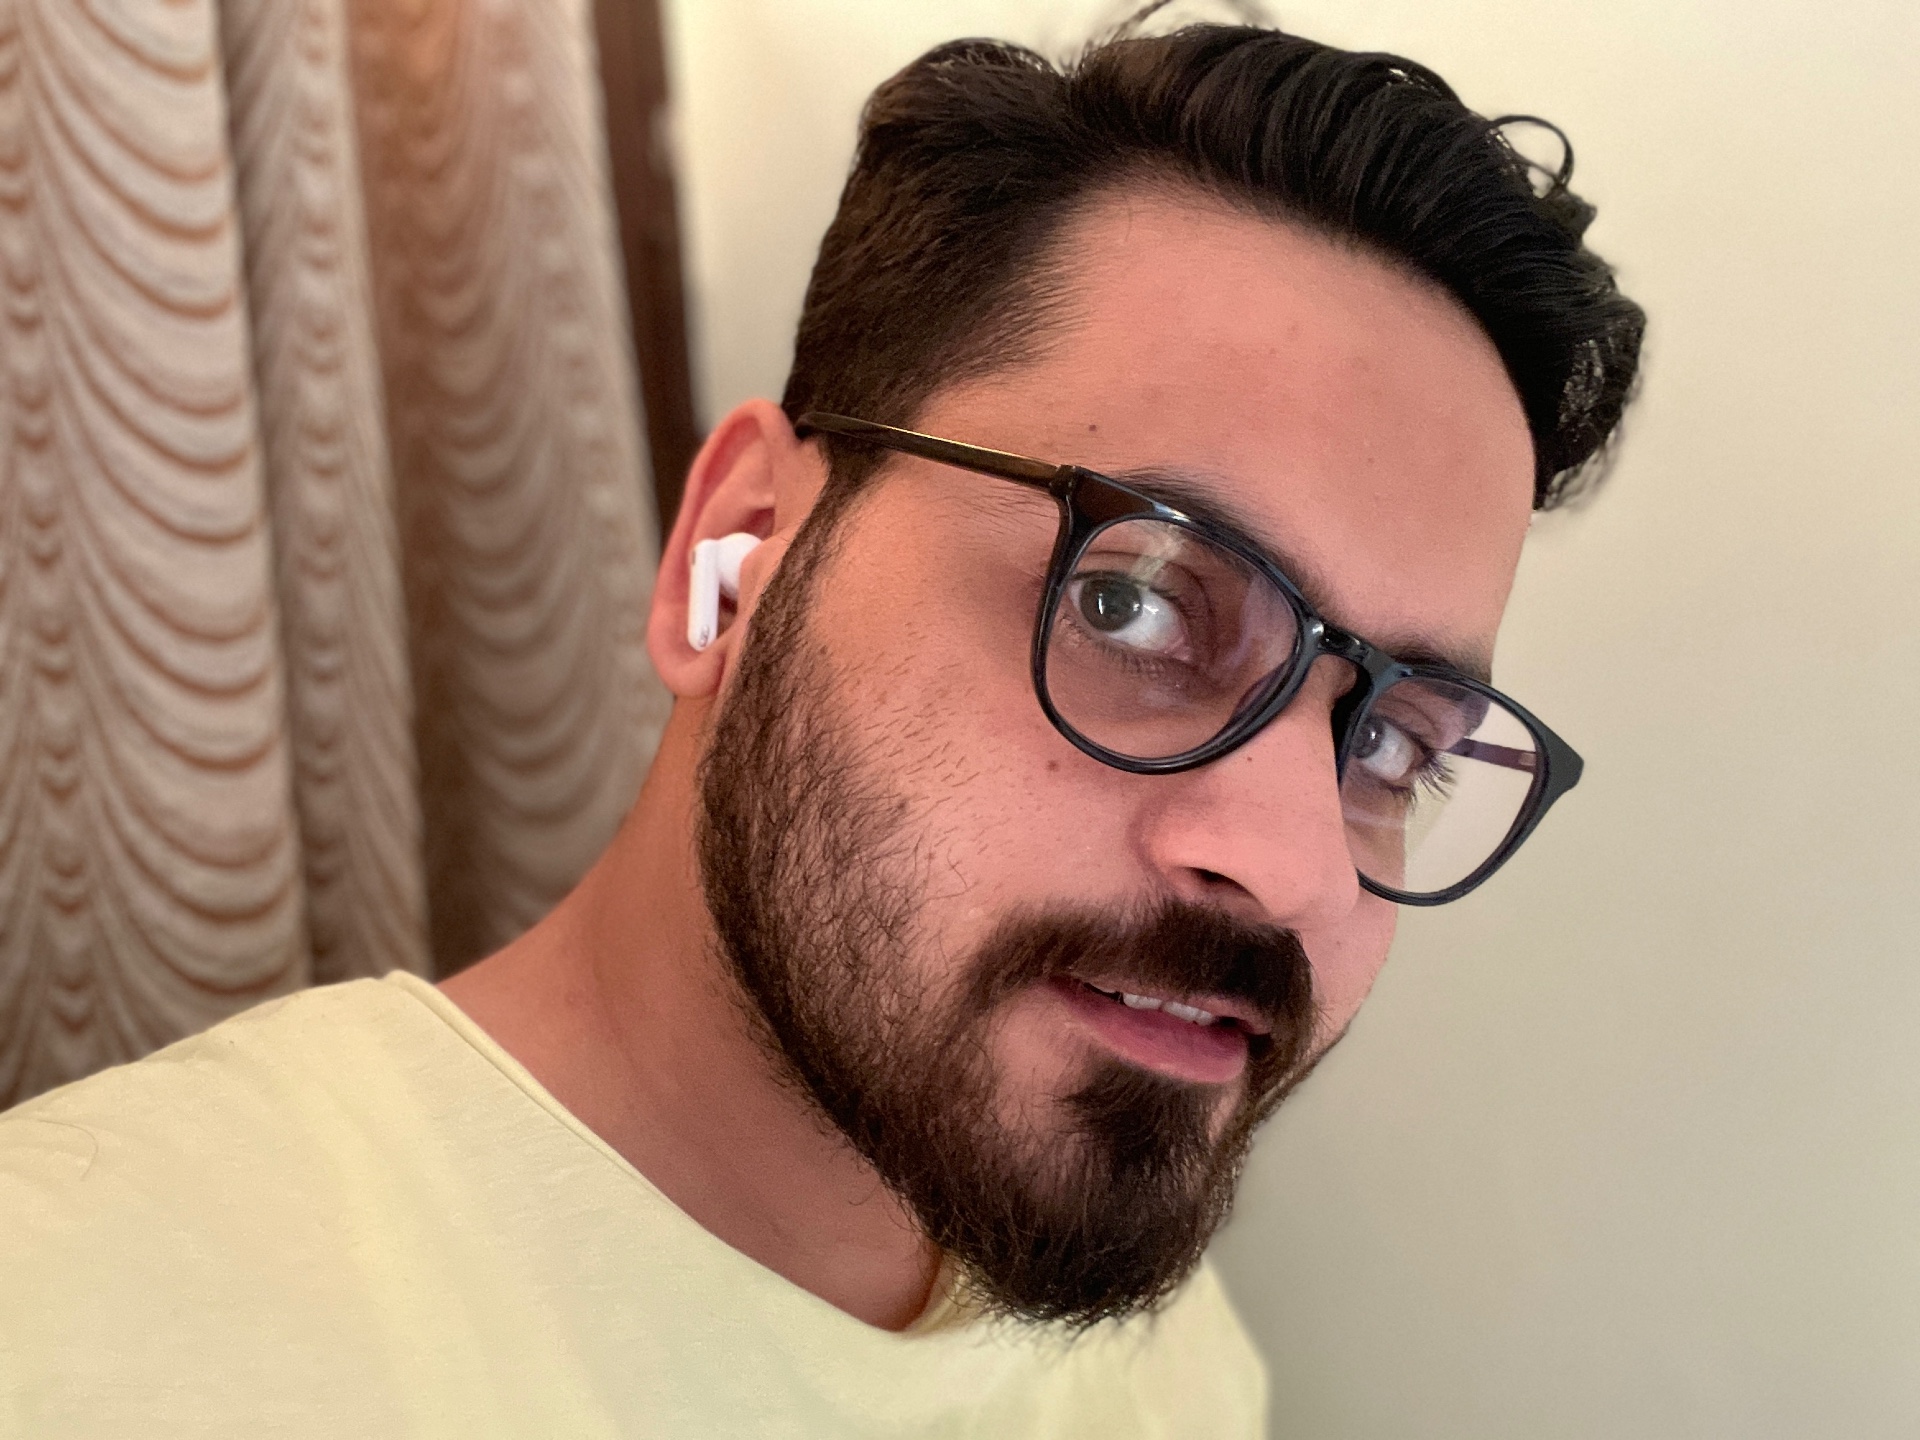 Tech Review: The OPPO Enco X2 earbuds provide a fantastic alternative - The  AU Review